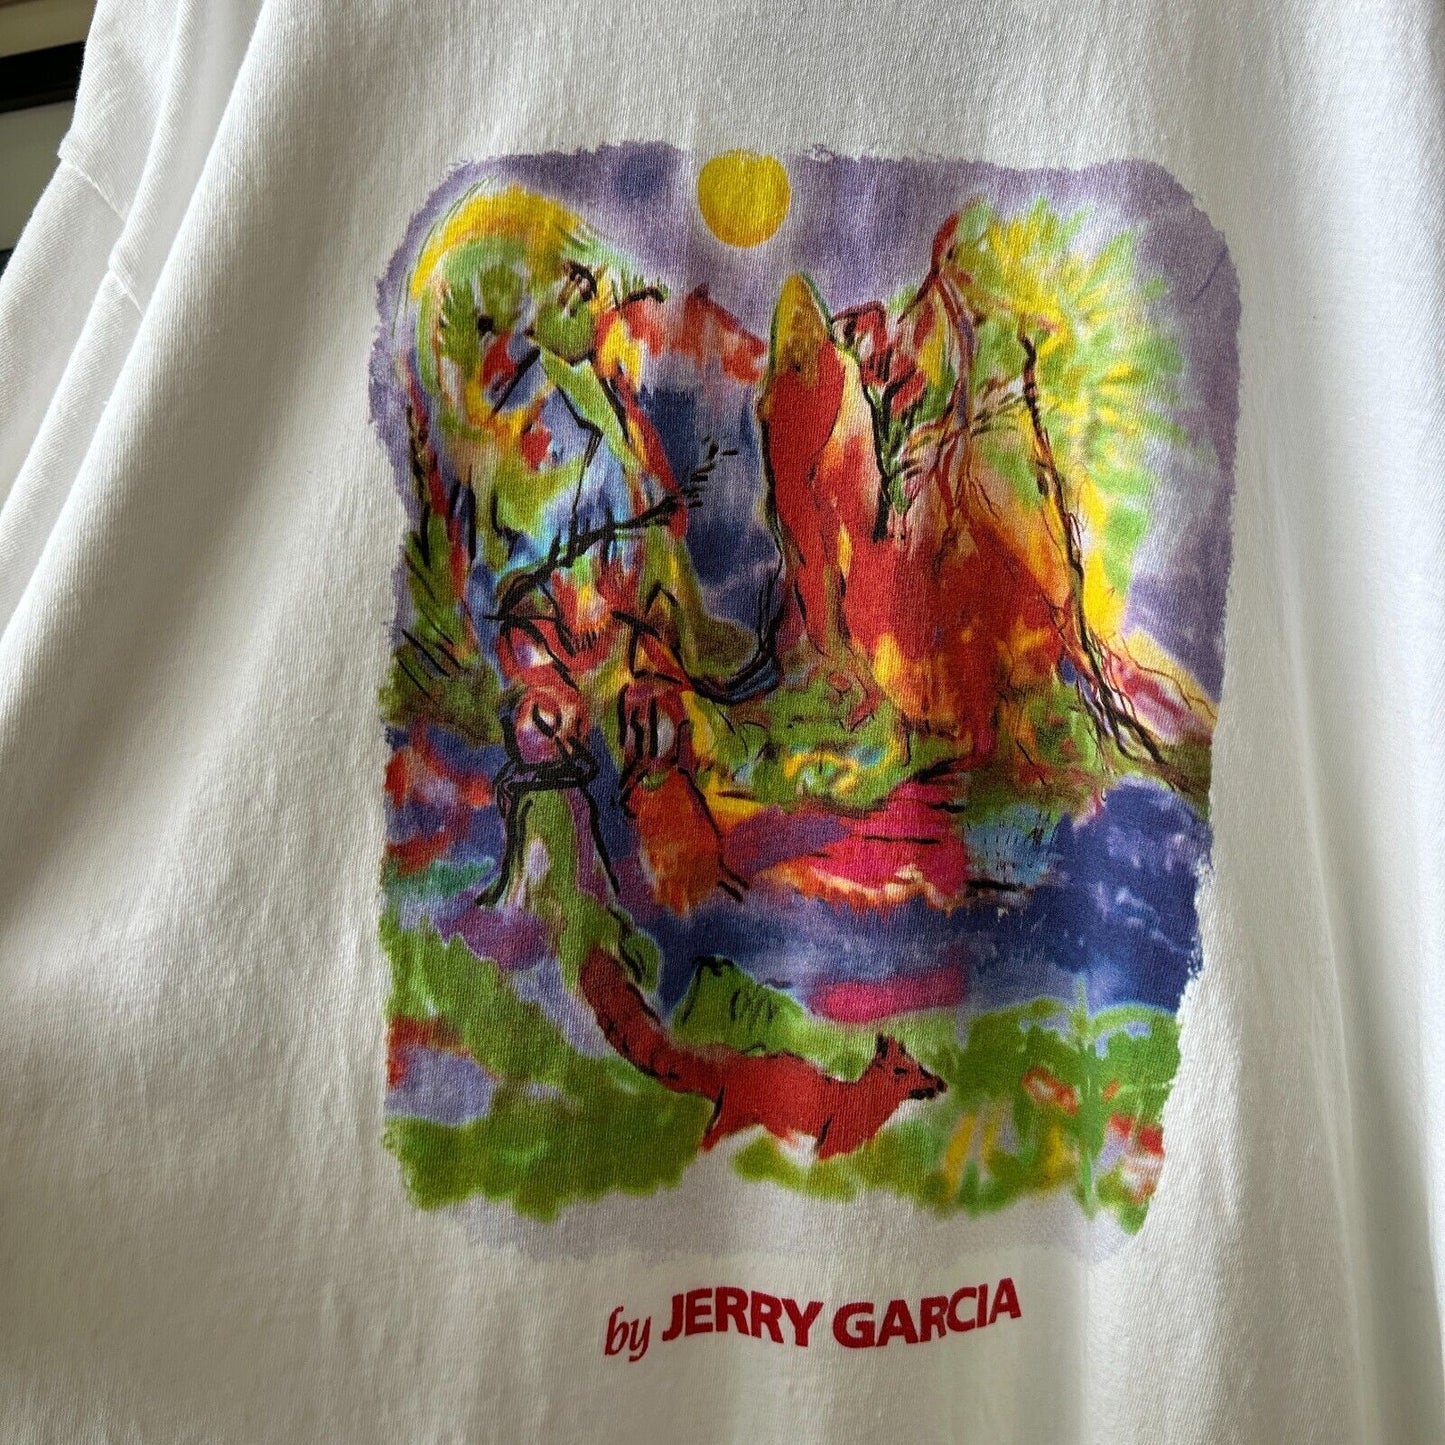 VINTAGE 90s | Jerry Garcia Private Issue Artwork T-Shirt sz XL Adult